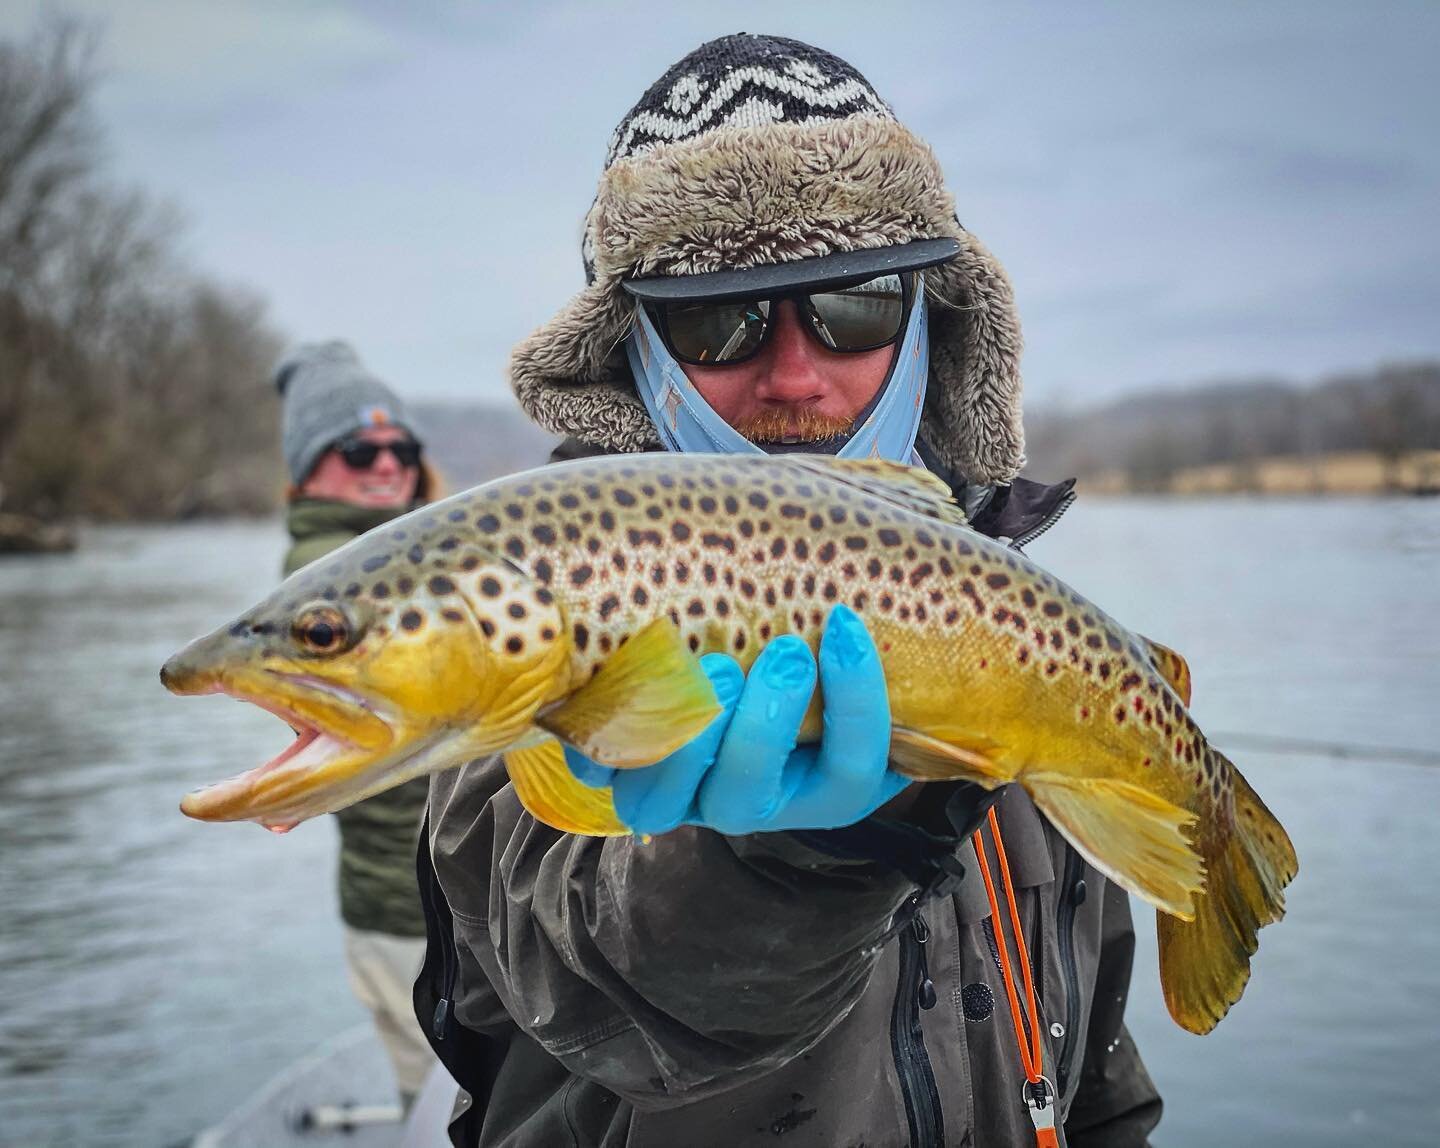 With a high of 9 degrees, we decided to keep our fingers dry and throw a bobber most of the day. 

Hint: wet skin in -13 windchill ain&rsquo;t fun- use exam gloves to keep as dry as possible in conditions like this. #themoreyouknow 
&bull;
&bull;
&bu